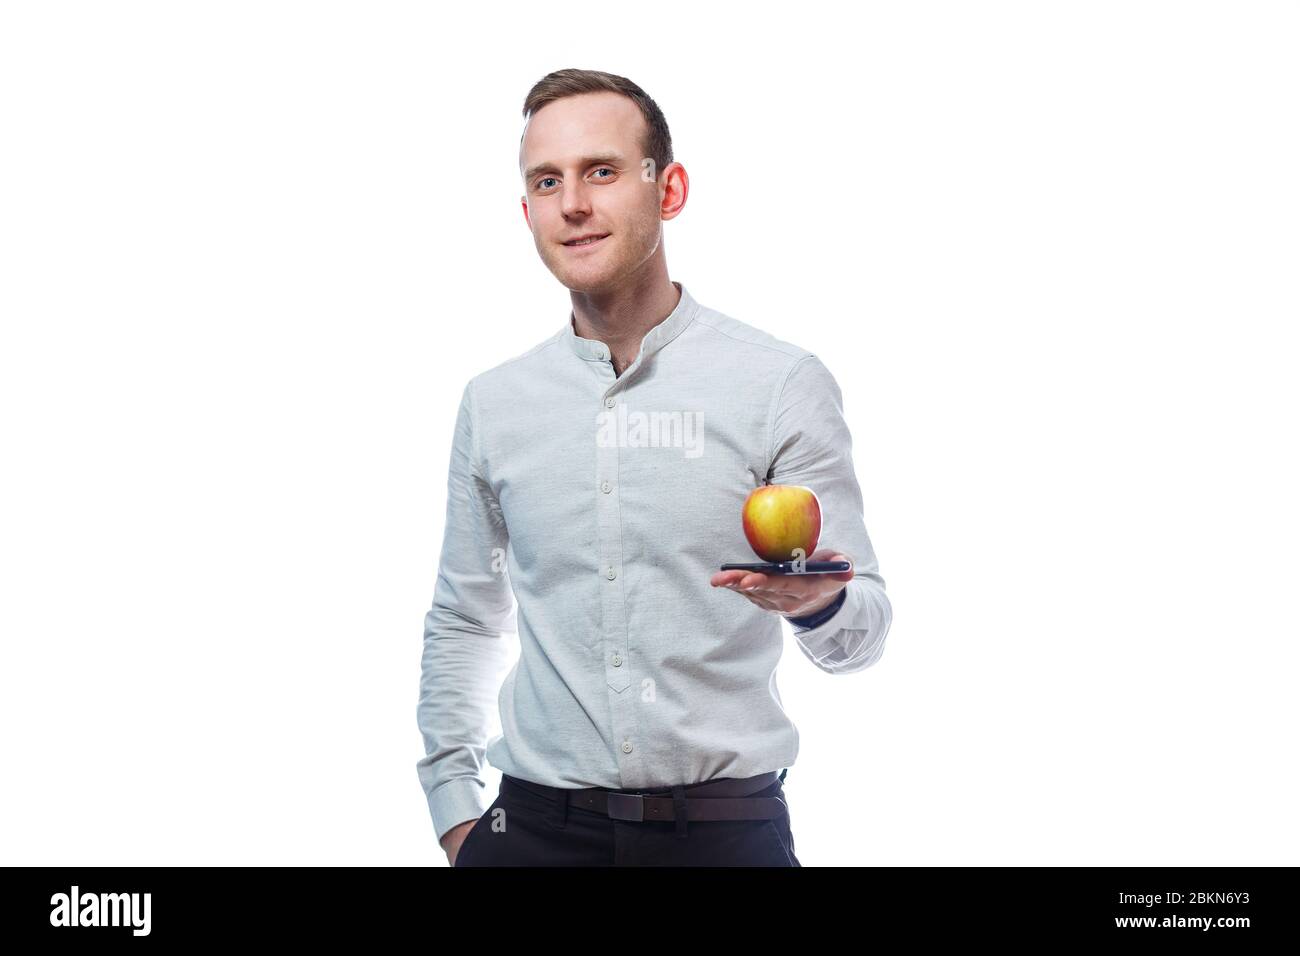 Caucasian male businessman holding a mobile phone in black and holding a red-yellow apple. He is wearing a shirt. Emotional portrait. Isolated on whit Stock Photo